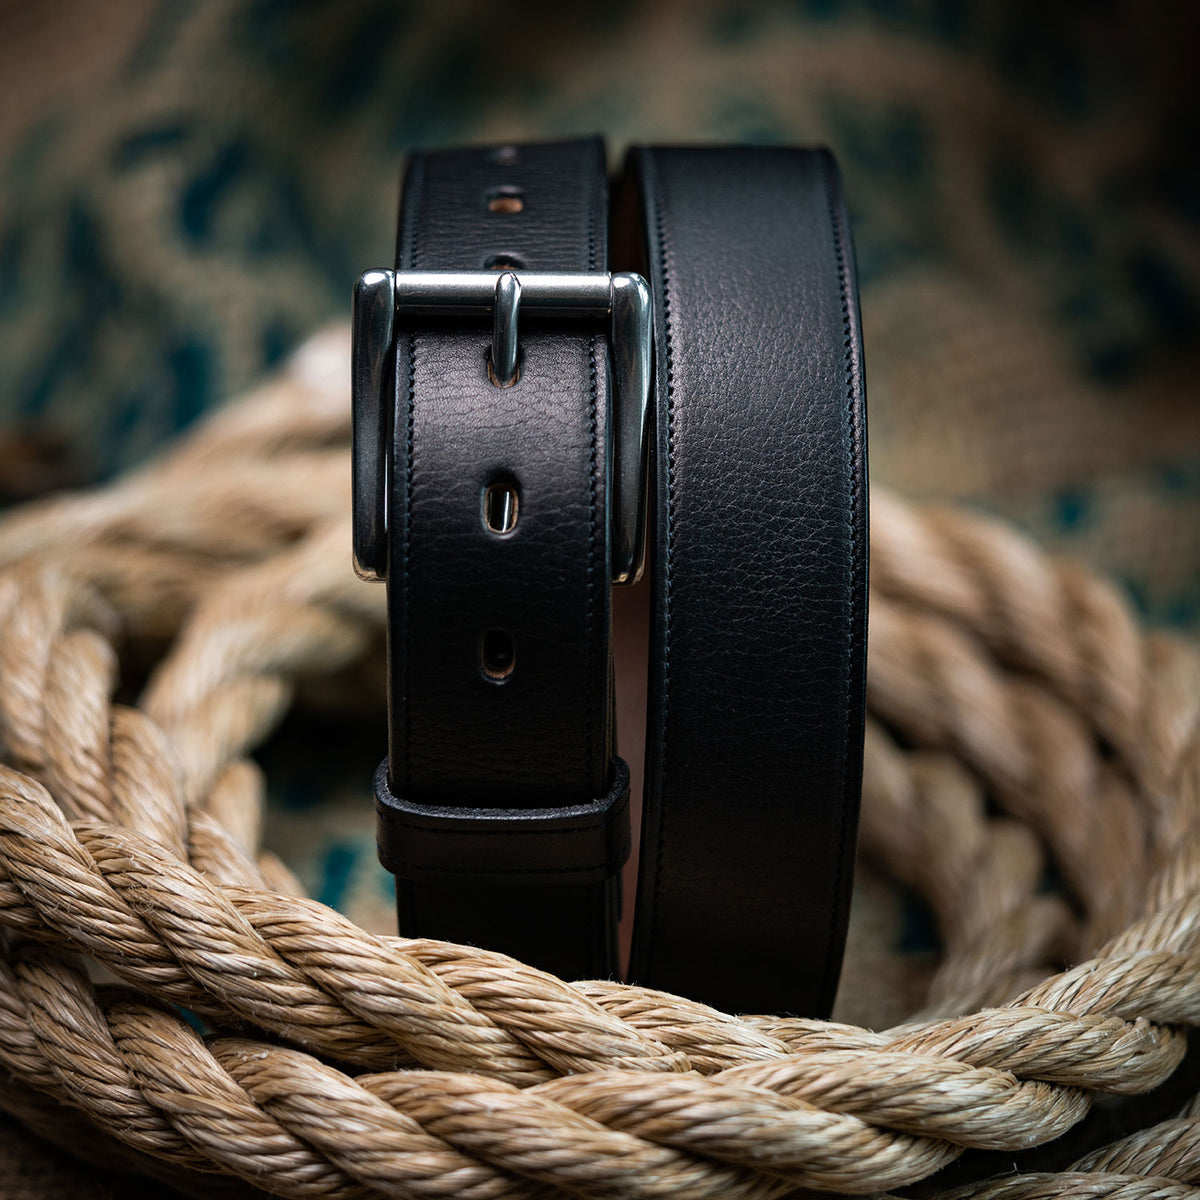 The Tuscan - Deluxe Embossed Lined Belt